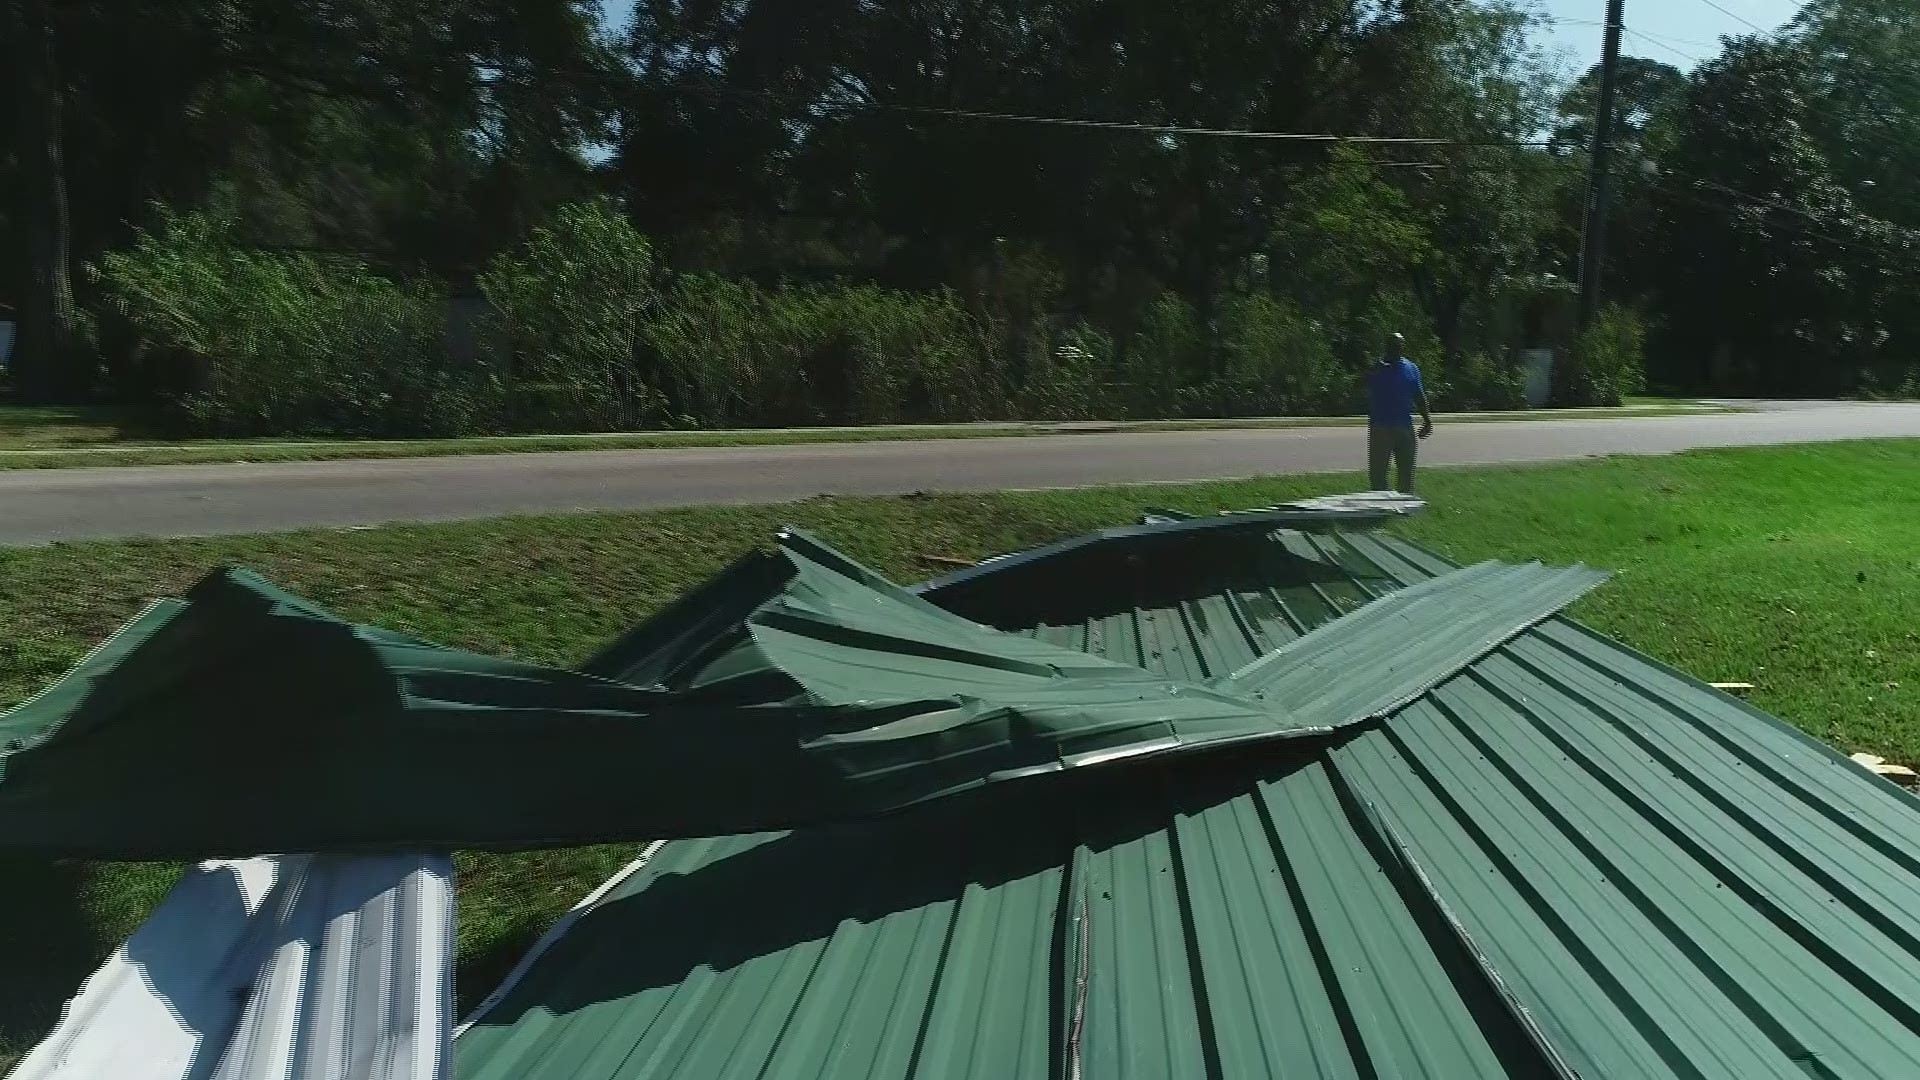 A James Island church is cleaning up after part of their roof was blown off by Hurricane Dorian.